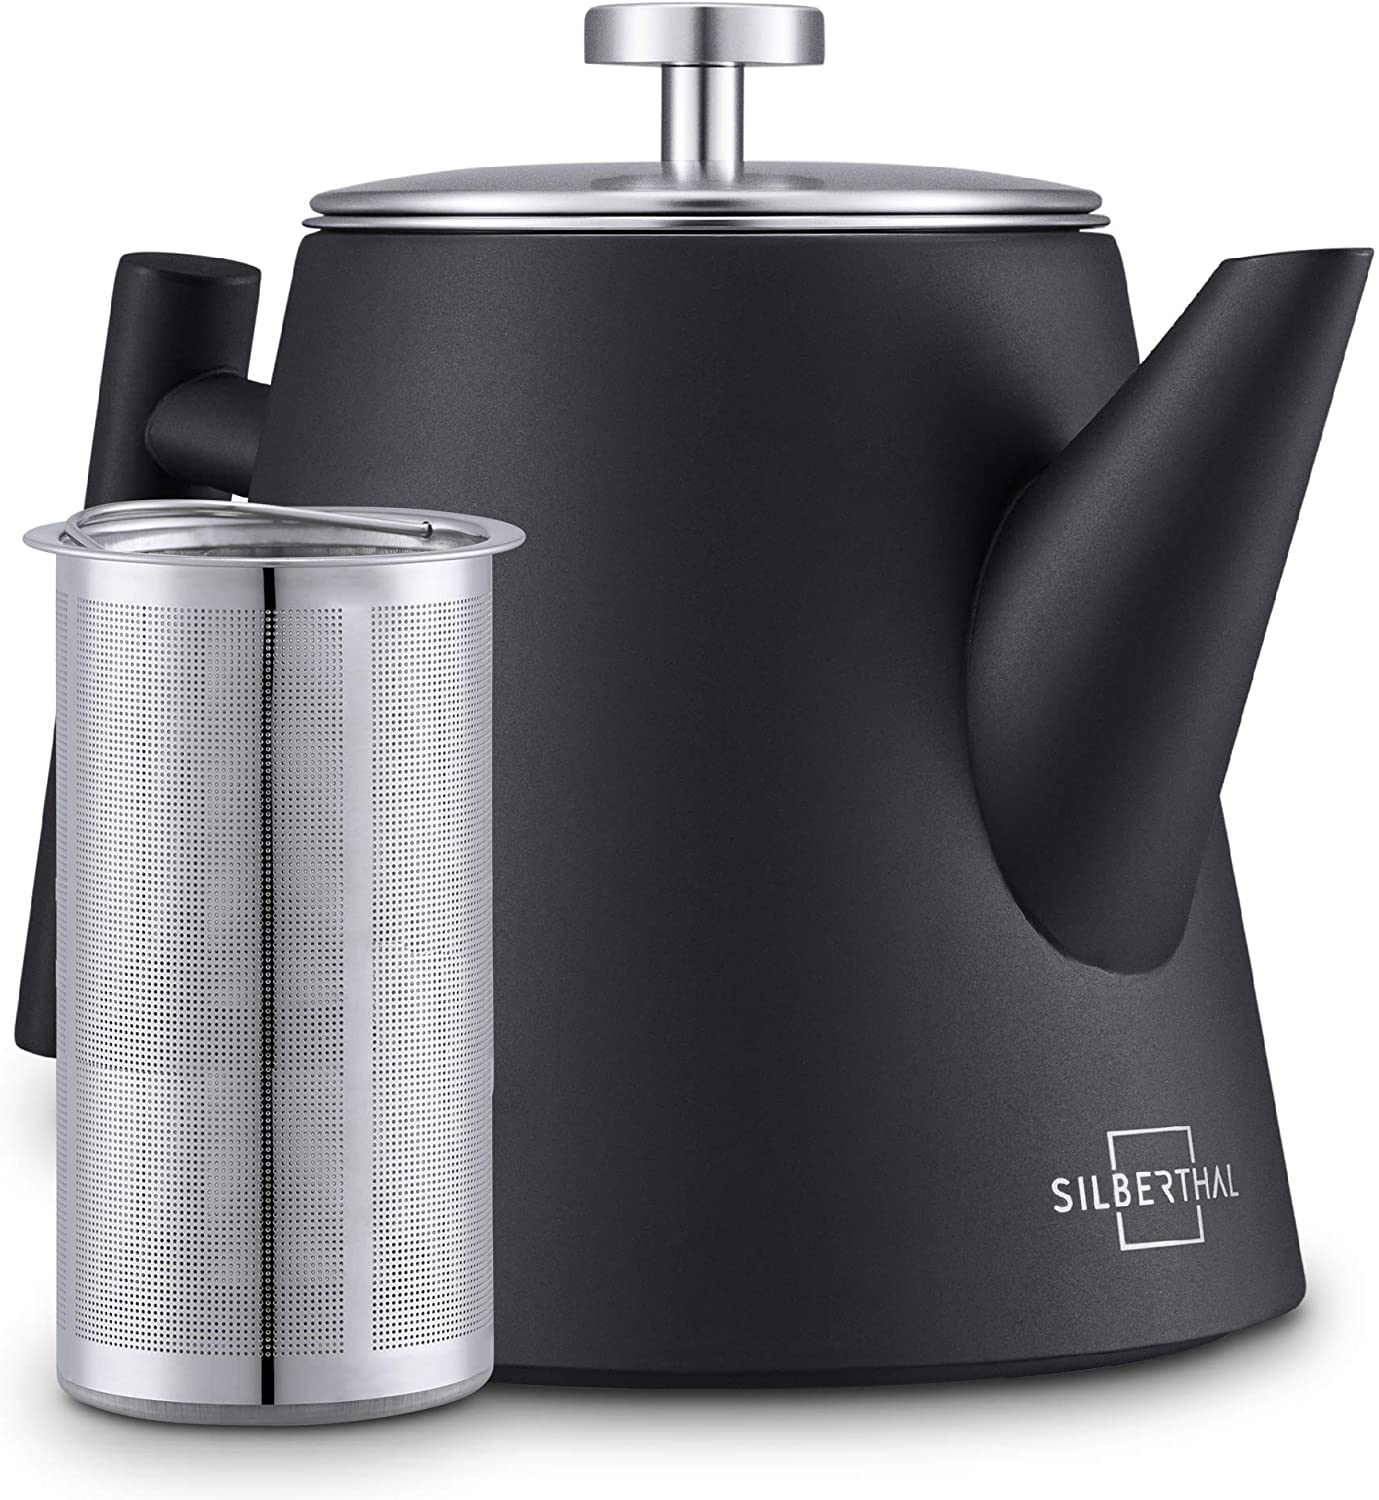 SILBERTHAL Insulated Double Walled Teapot - Infuser for Loose Tea- Stainless Steel - 1L / 6 Cups